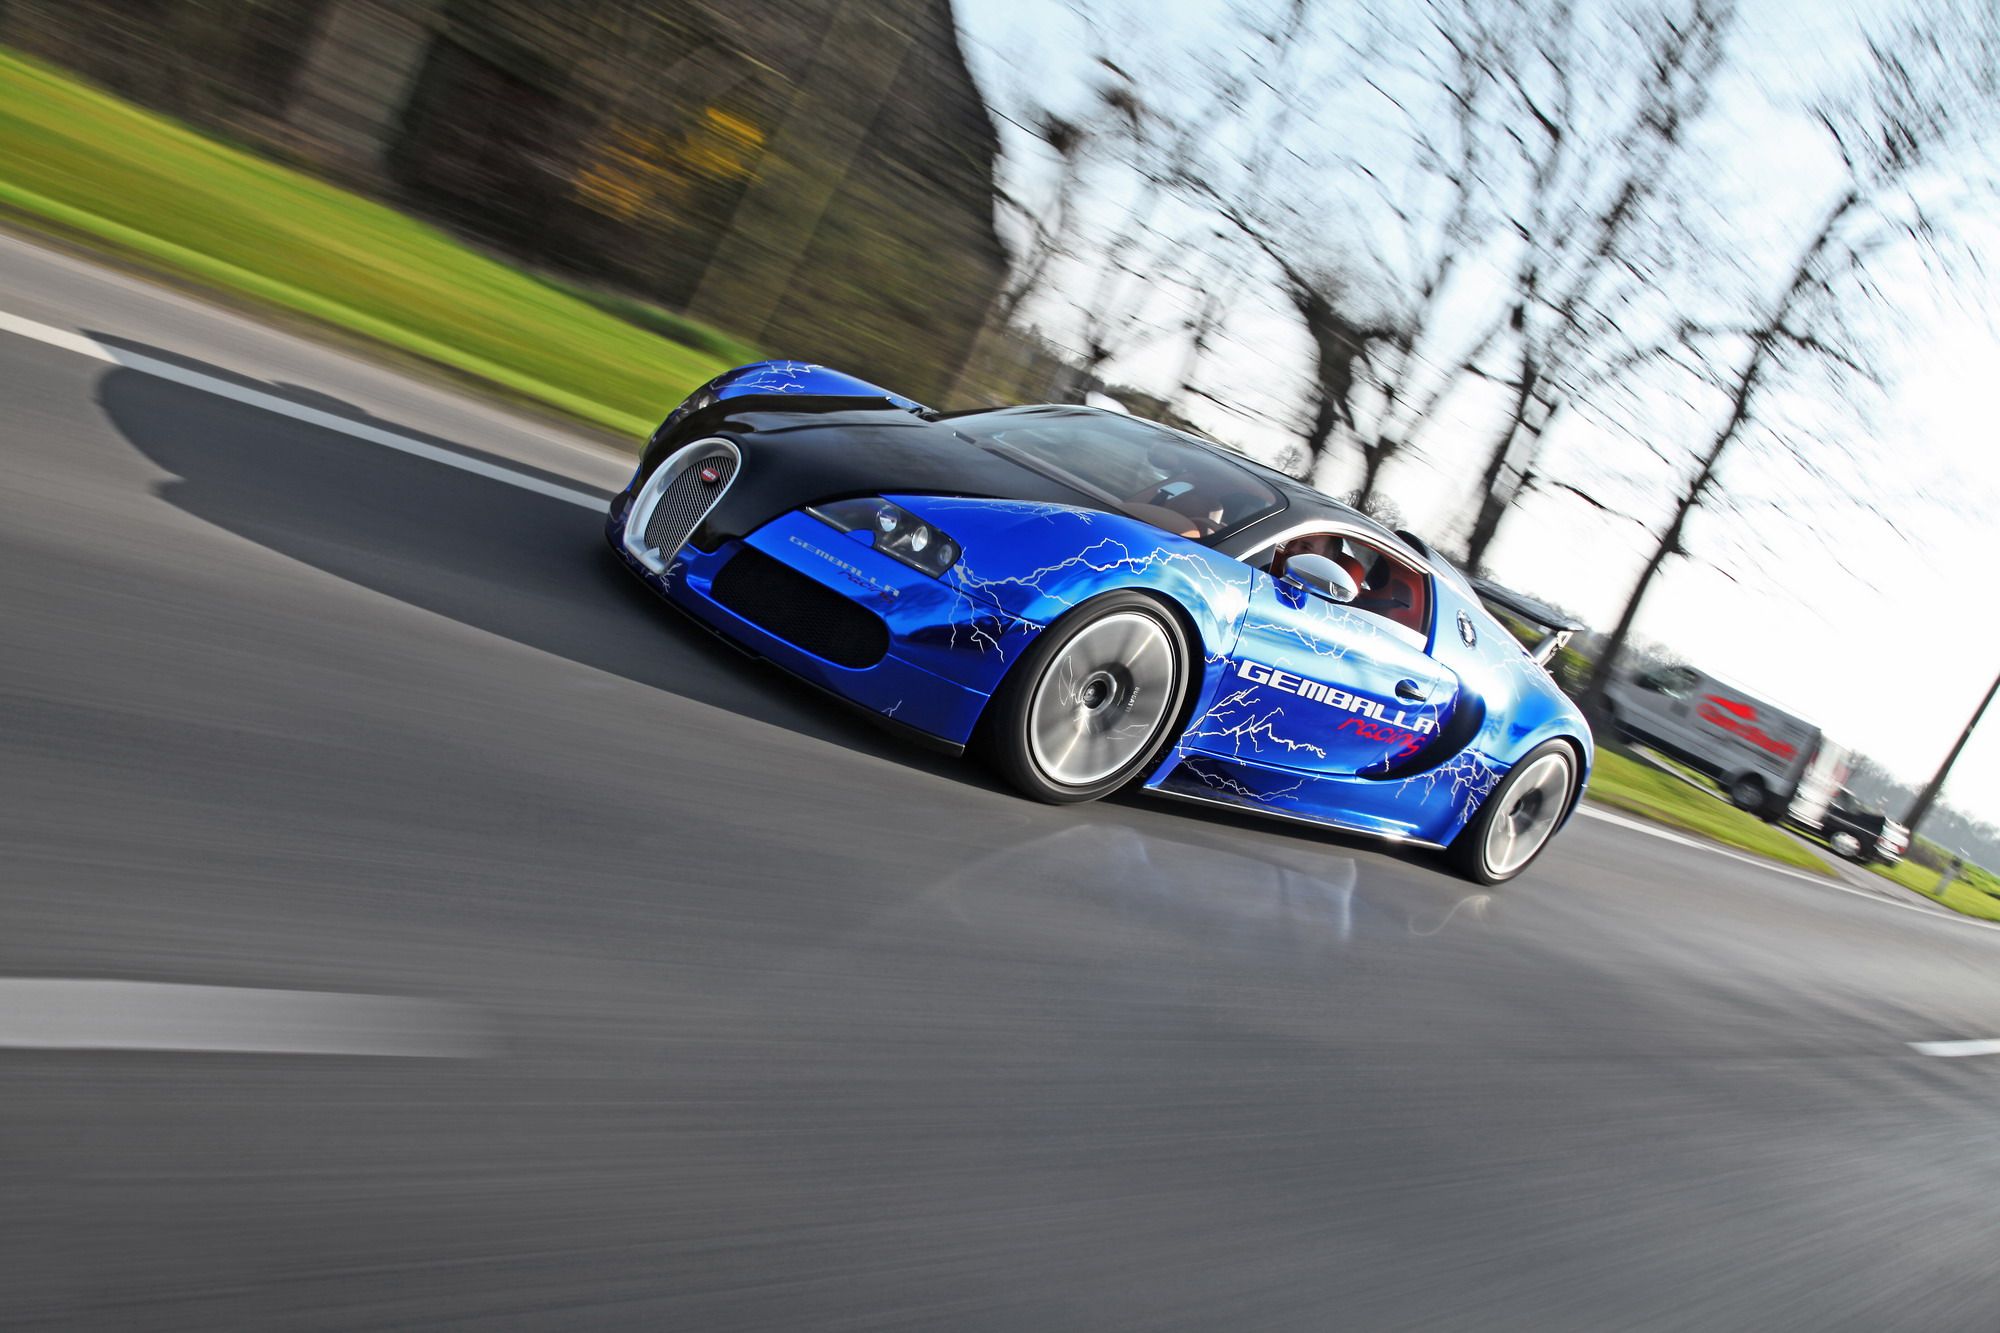 2012 Bugatti Veyron Sang Gemballa Blue by Gemballa Racing and Cam Shaft